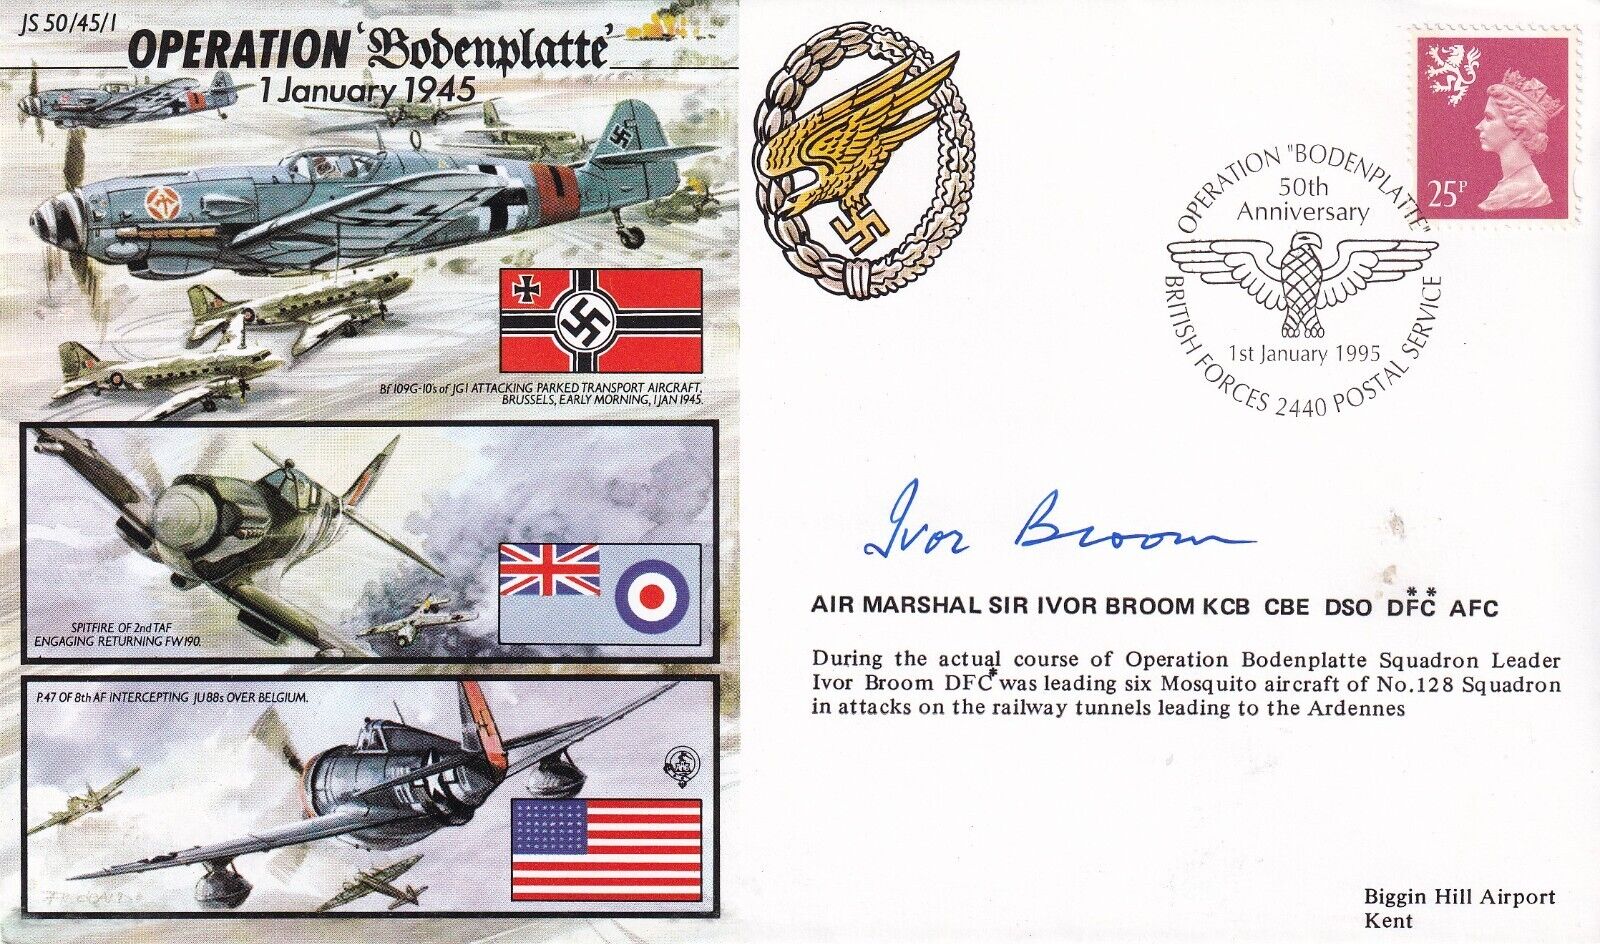 45/1c Operation Bodenplatte Signed by AM Sir Ivor Broom  WW11 Mosquito Pilot